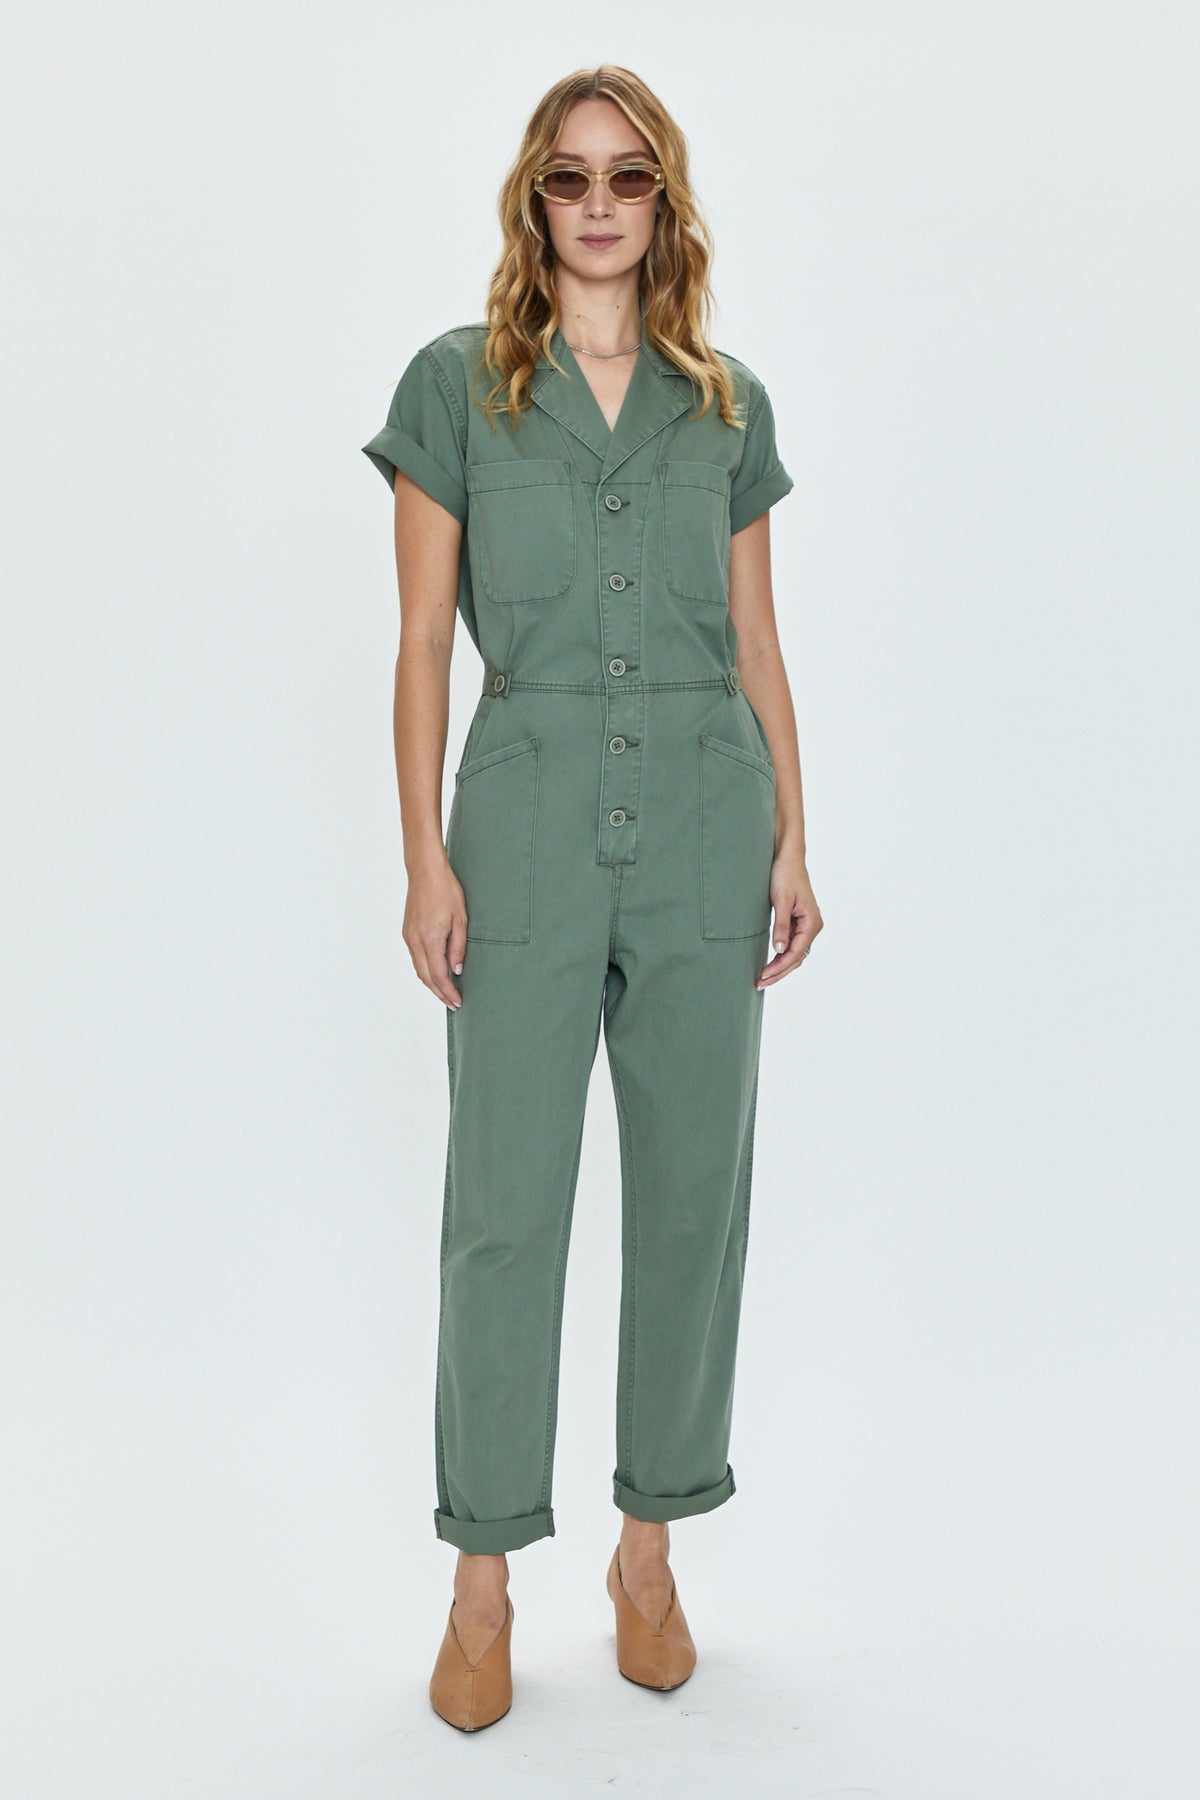 Grover Short Sleeve Field Suit - Colonel
            
              Sale